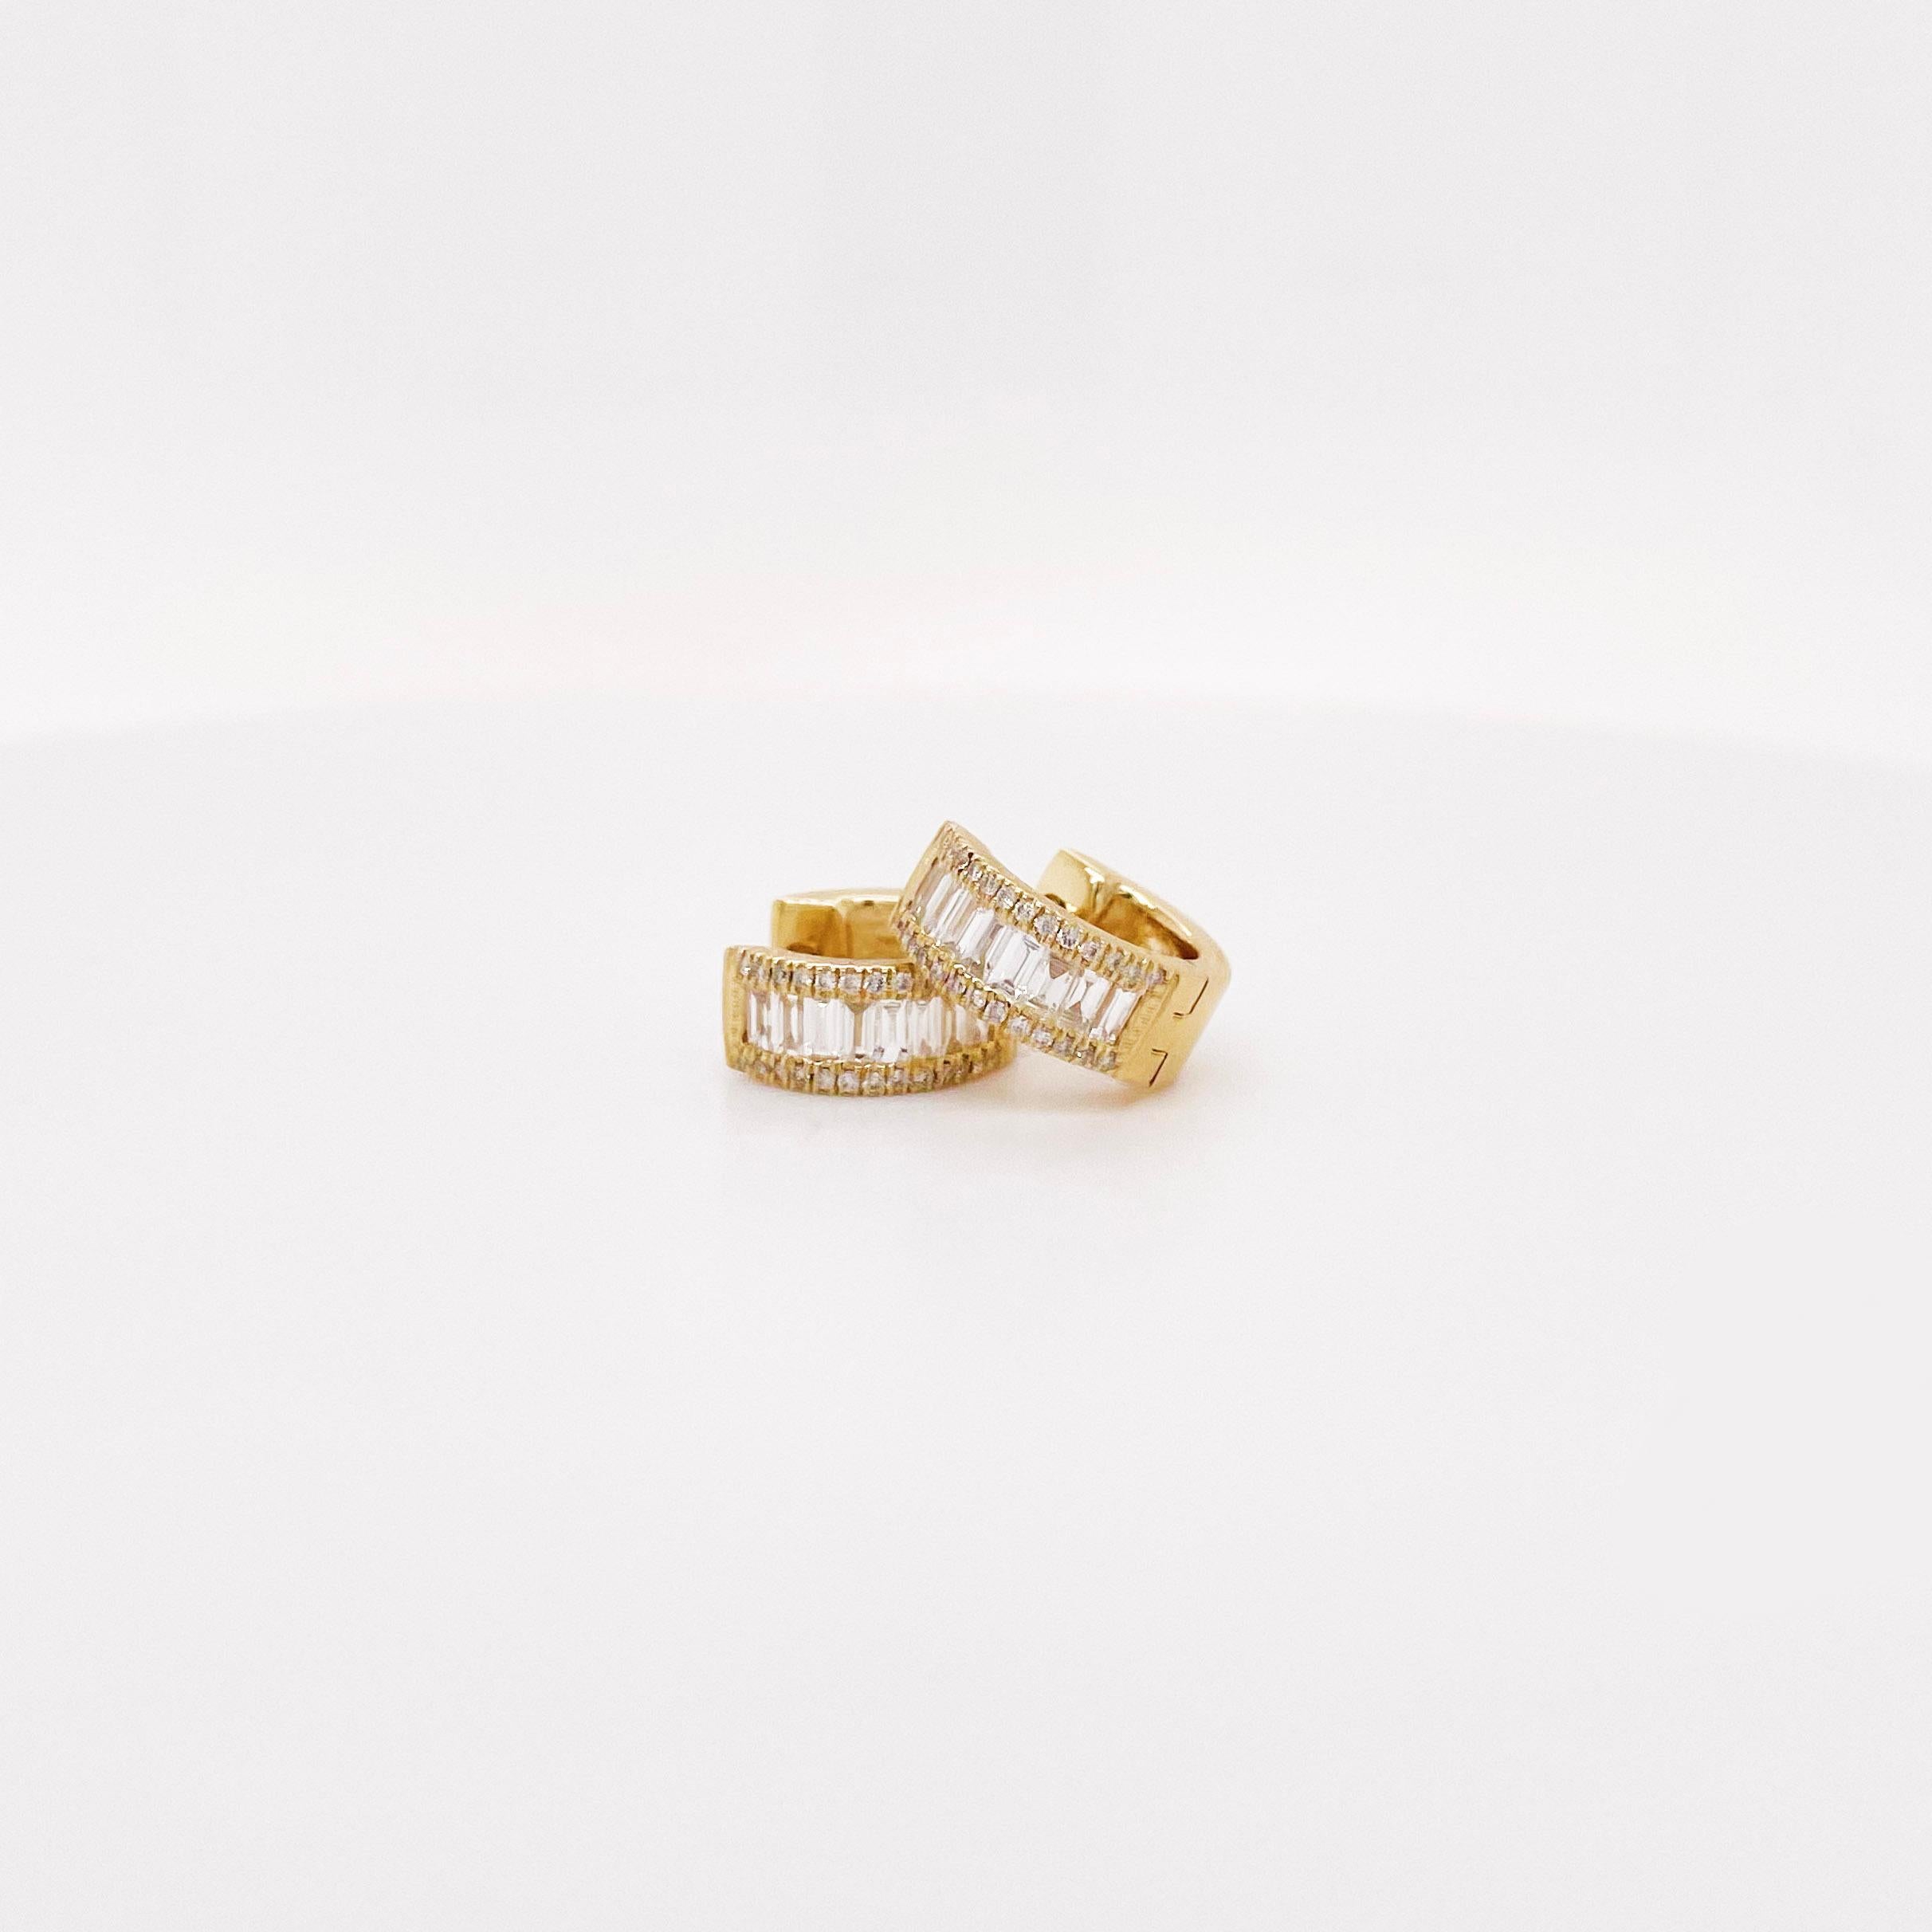 With over half a carat of total diamond weight, these diamond huggies are the hottest design! Diamond huggies have been popular for 2021 and their design just upgraded! The huggie earrings have baguette diamonds set in a seamless design. The